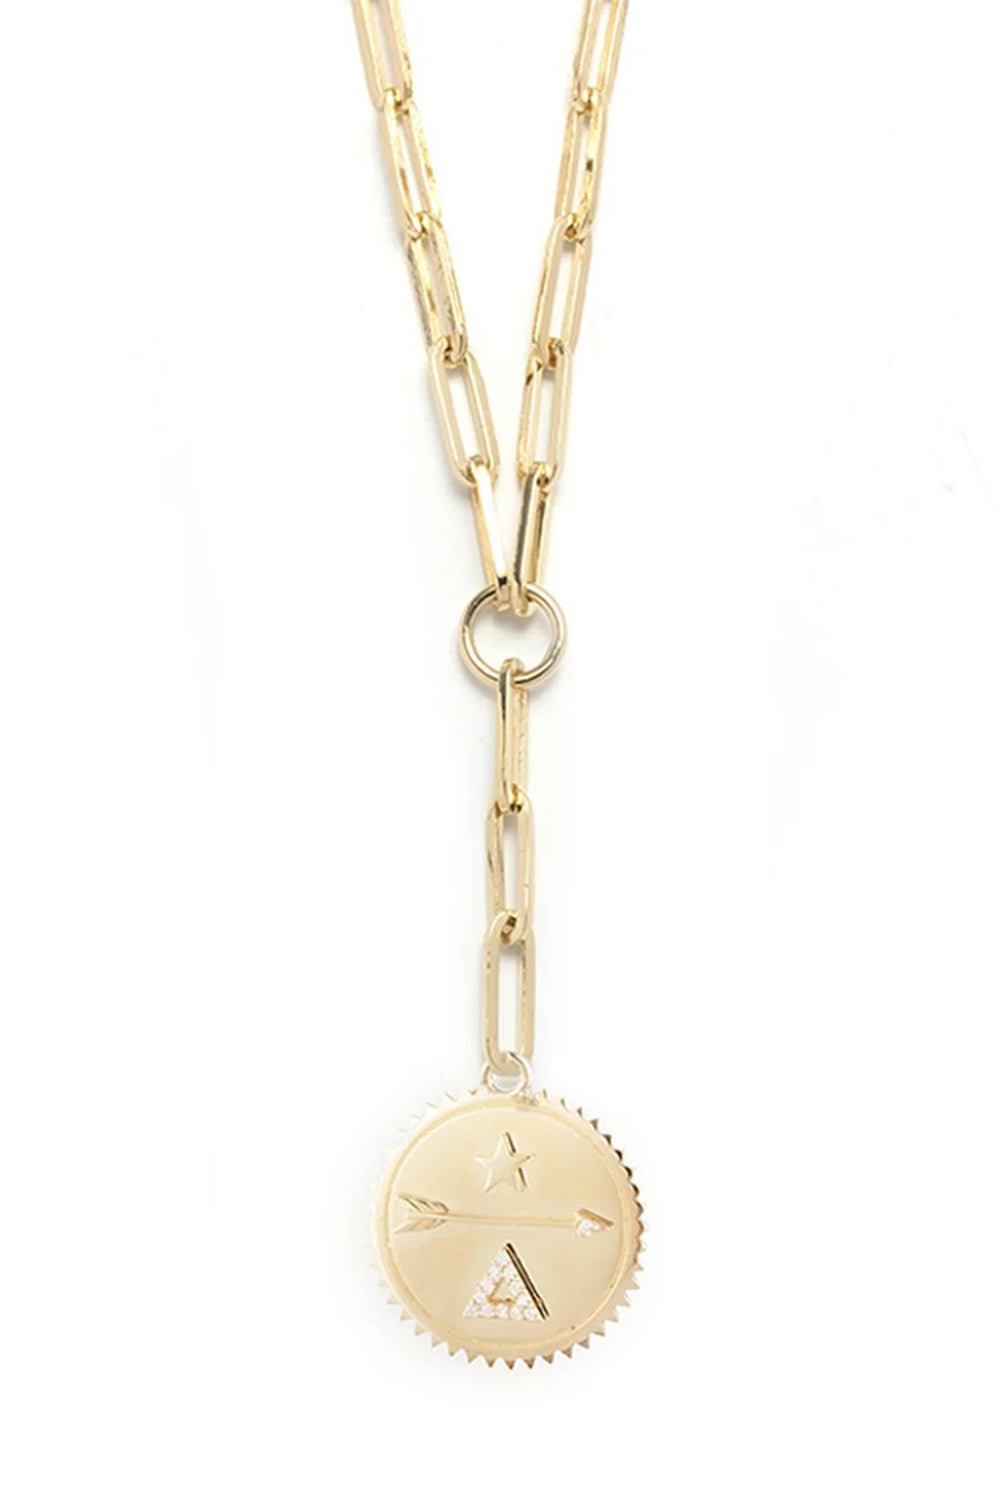 FOUNDRAE-Classic Fob Dream Necklace-YELLOW GOLD